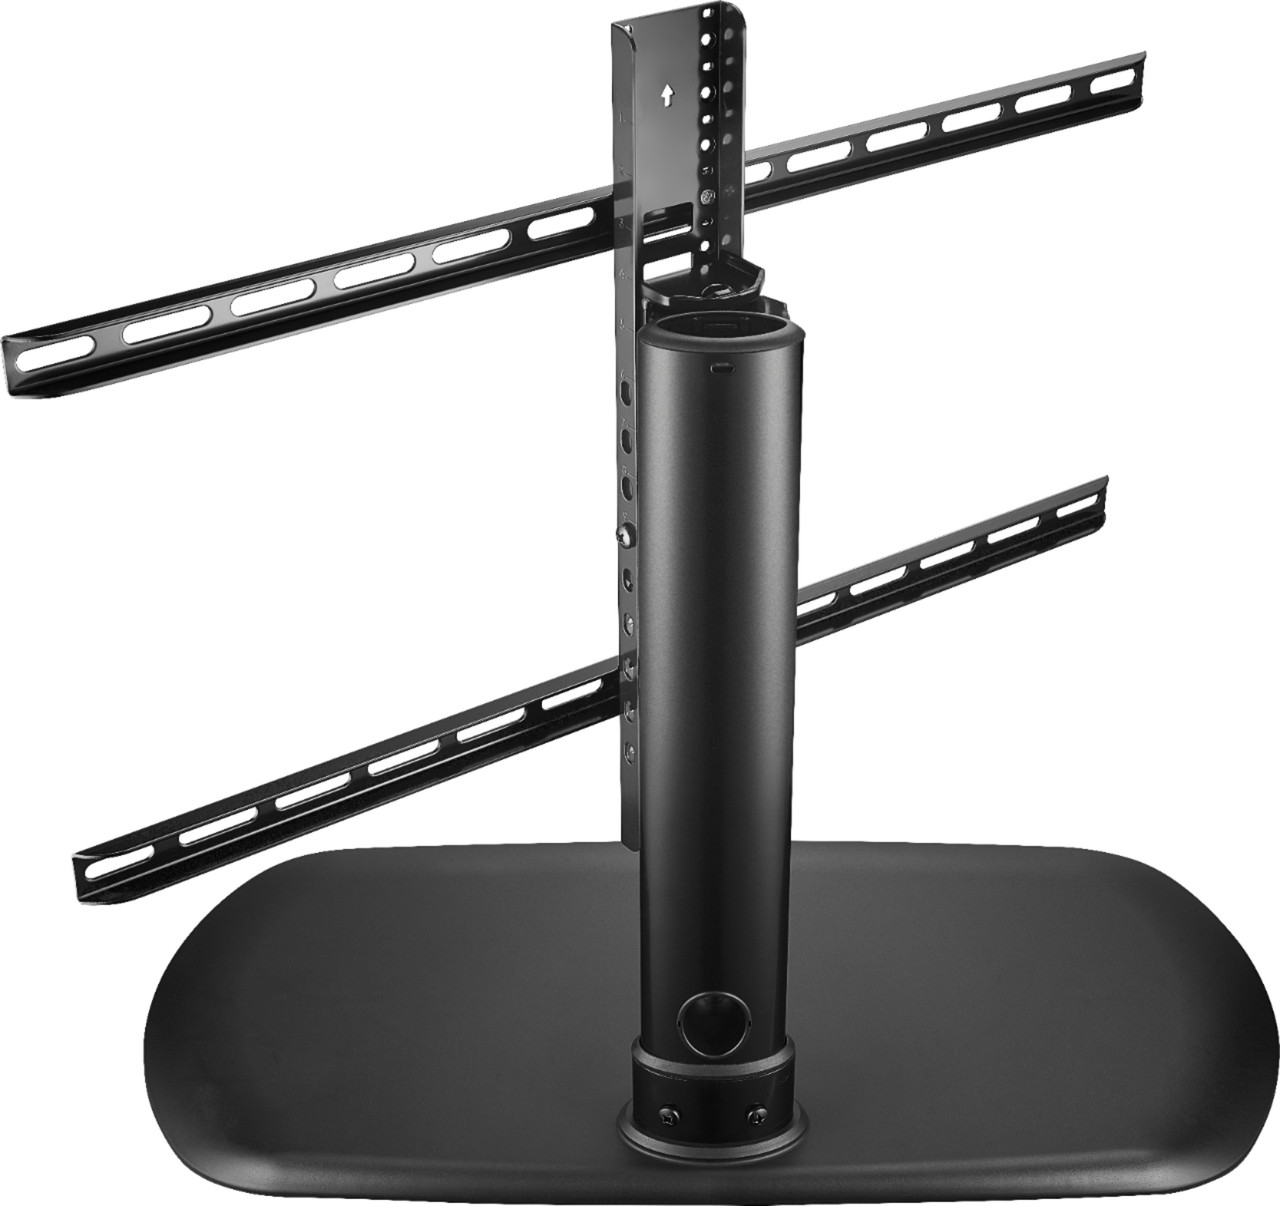 Insignia™ - TV Stand for Most Flat-Panel TVs Up to 65" - Black